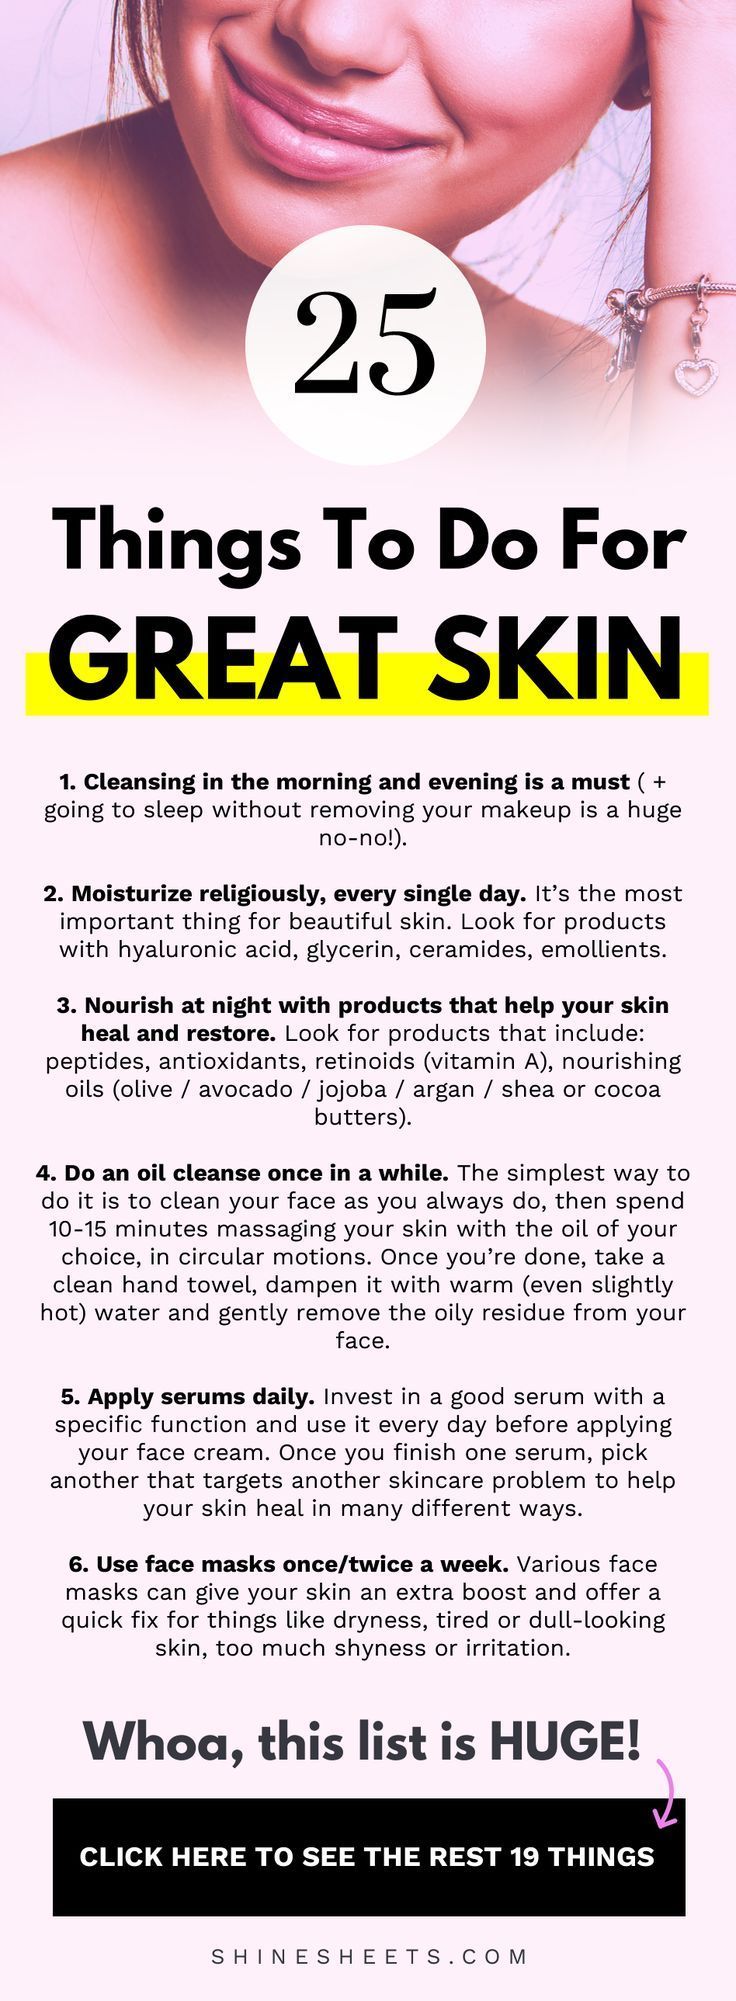 25 Things To Do For Stunning Skin | ShineSheets - 25 Things To Do For Stunning Skin | ShineSheets -   19 beauty Care hacks ideas